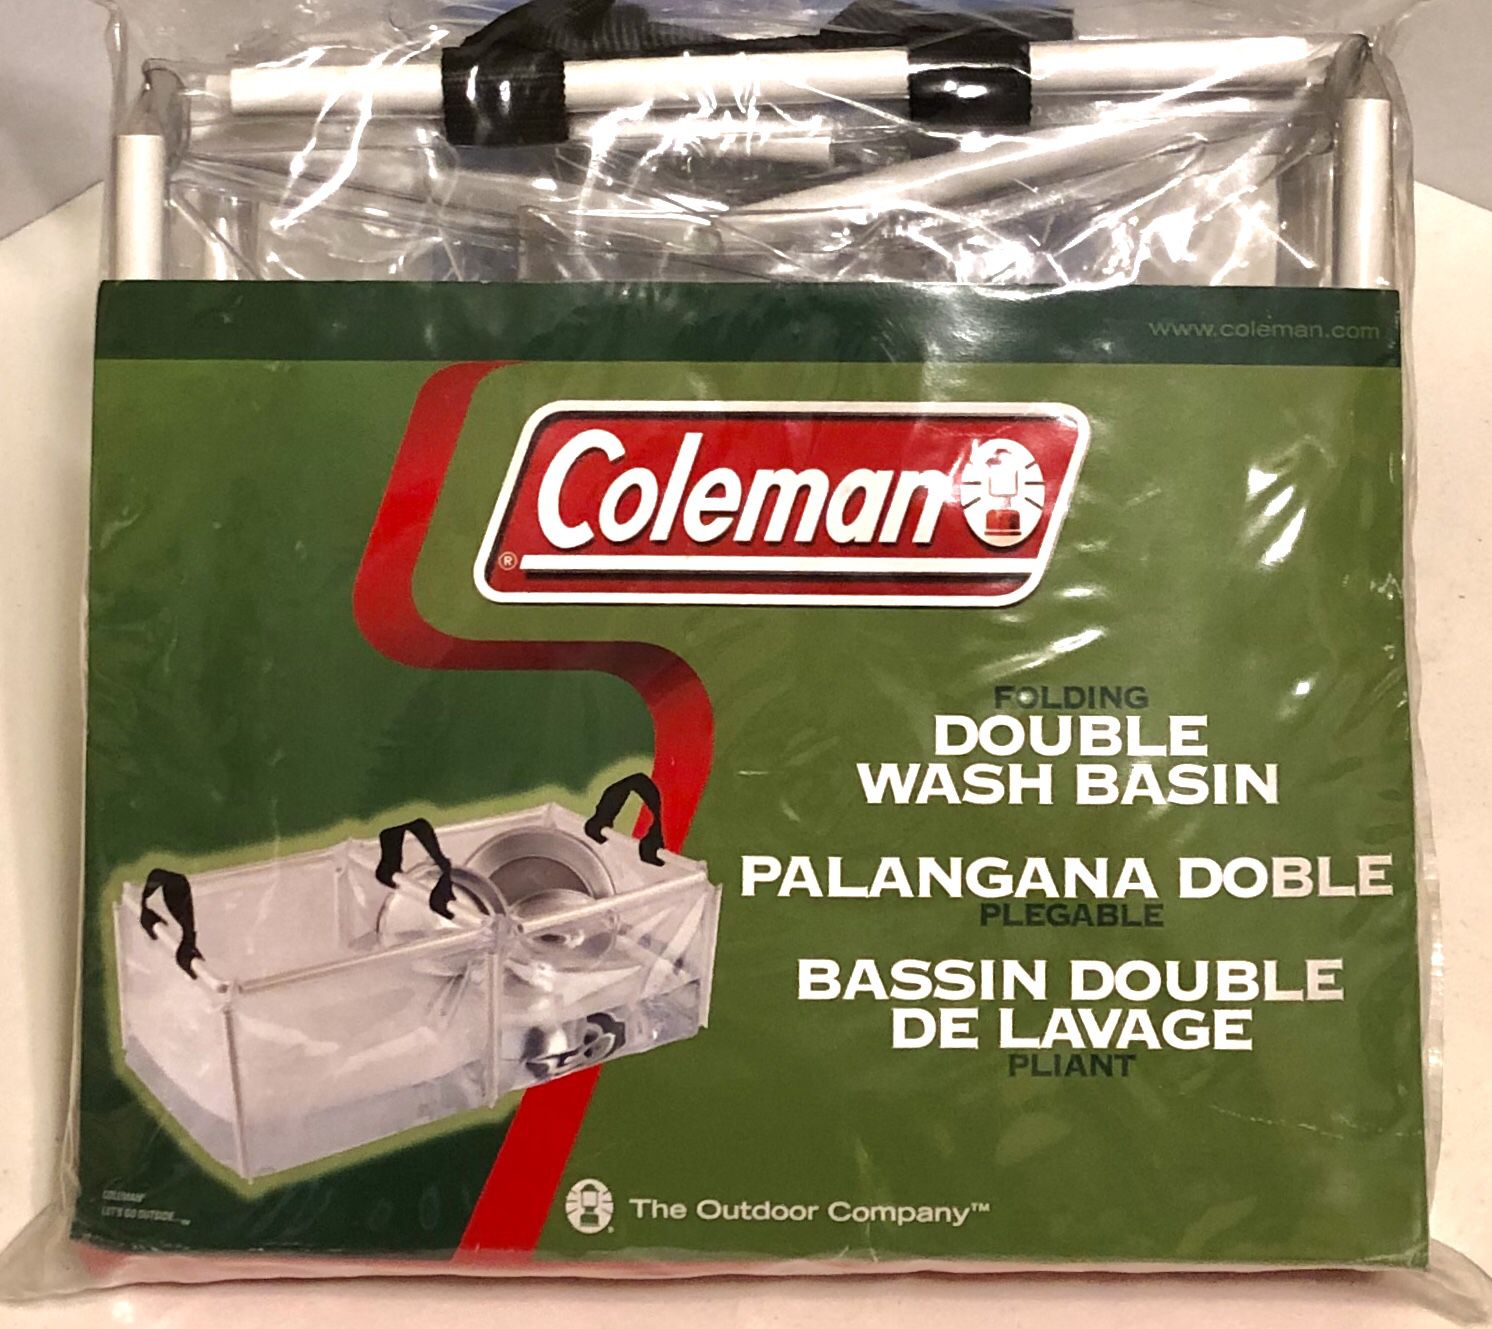 LOWER PRICE! Coleman Camp Sink, Portable Sink for Camping, Double Wash Basin Foldable. Condition is Like New